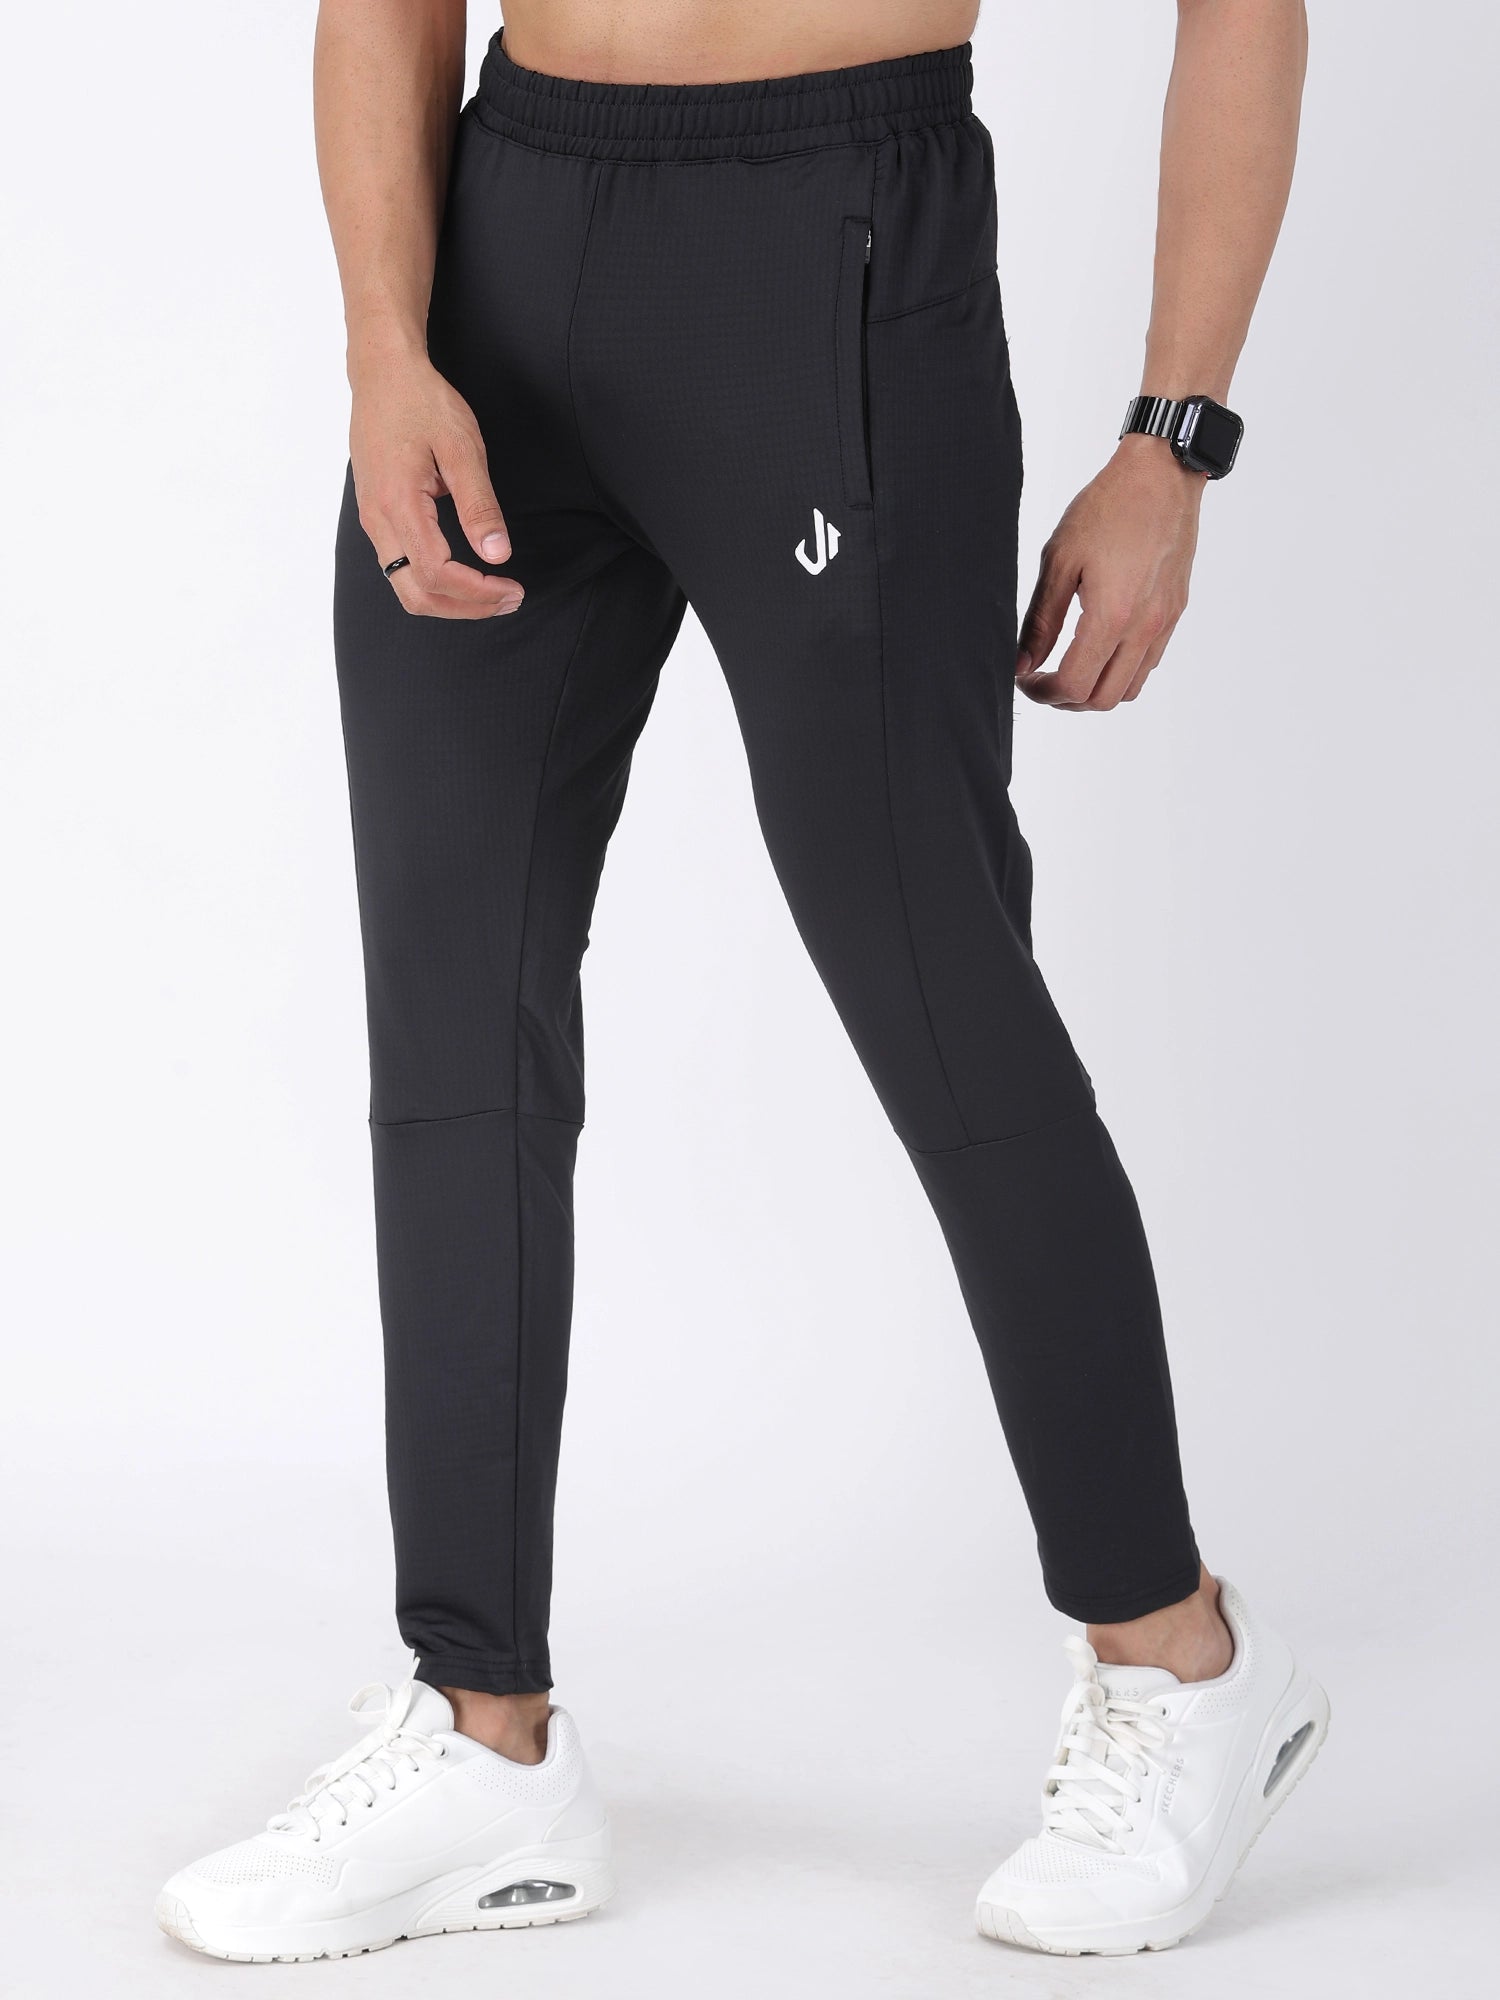 Mens Silk Silk Joggers Workout Sweatpants For Gym, Fitness, Hip Hop, And  Casual Wear Elastic Skinny Tracksuit With Siksilk Design From  Premiumbrandtops, $6.38 | DHgate.Com